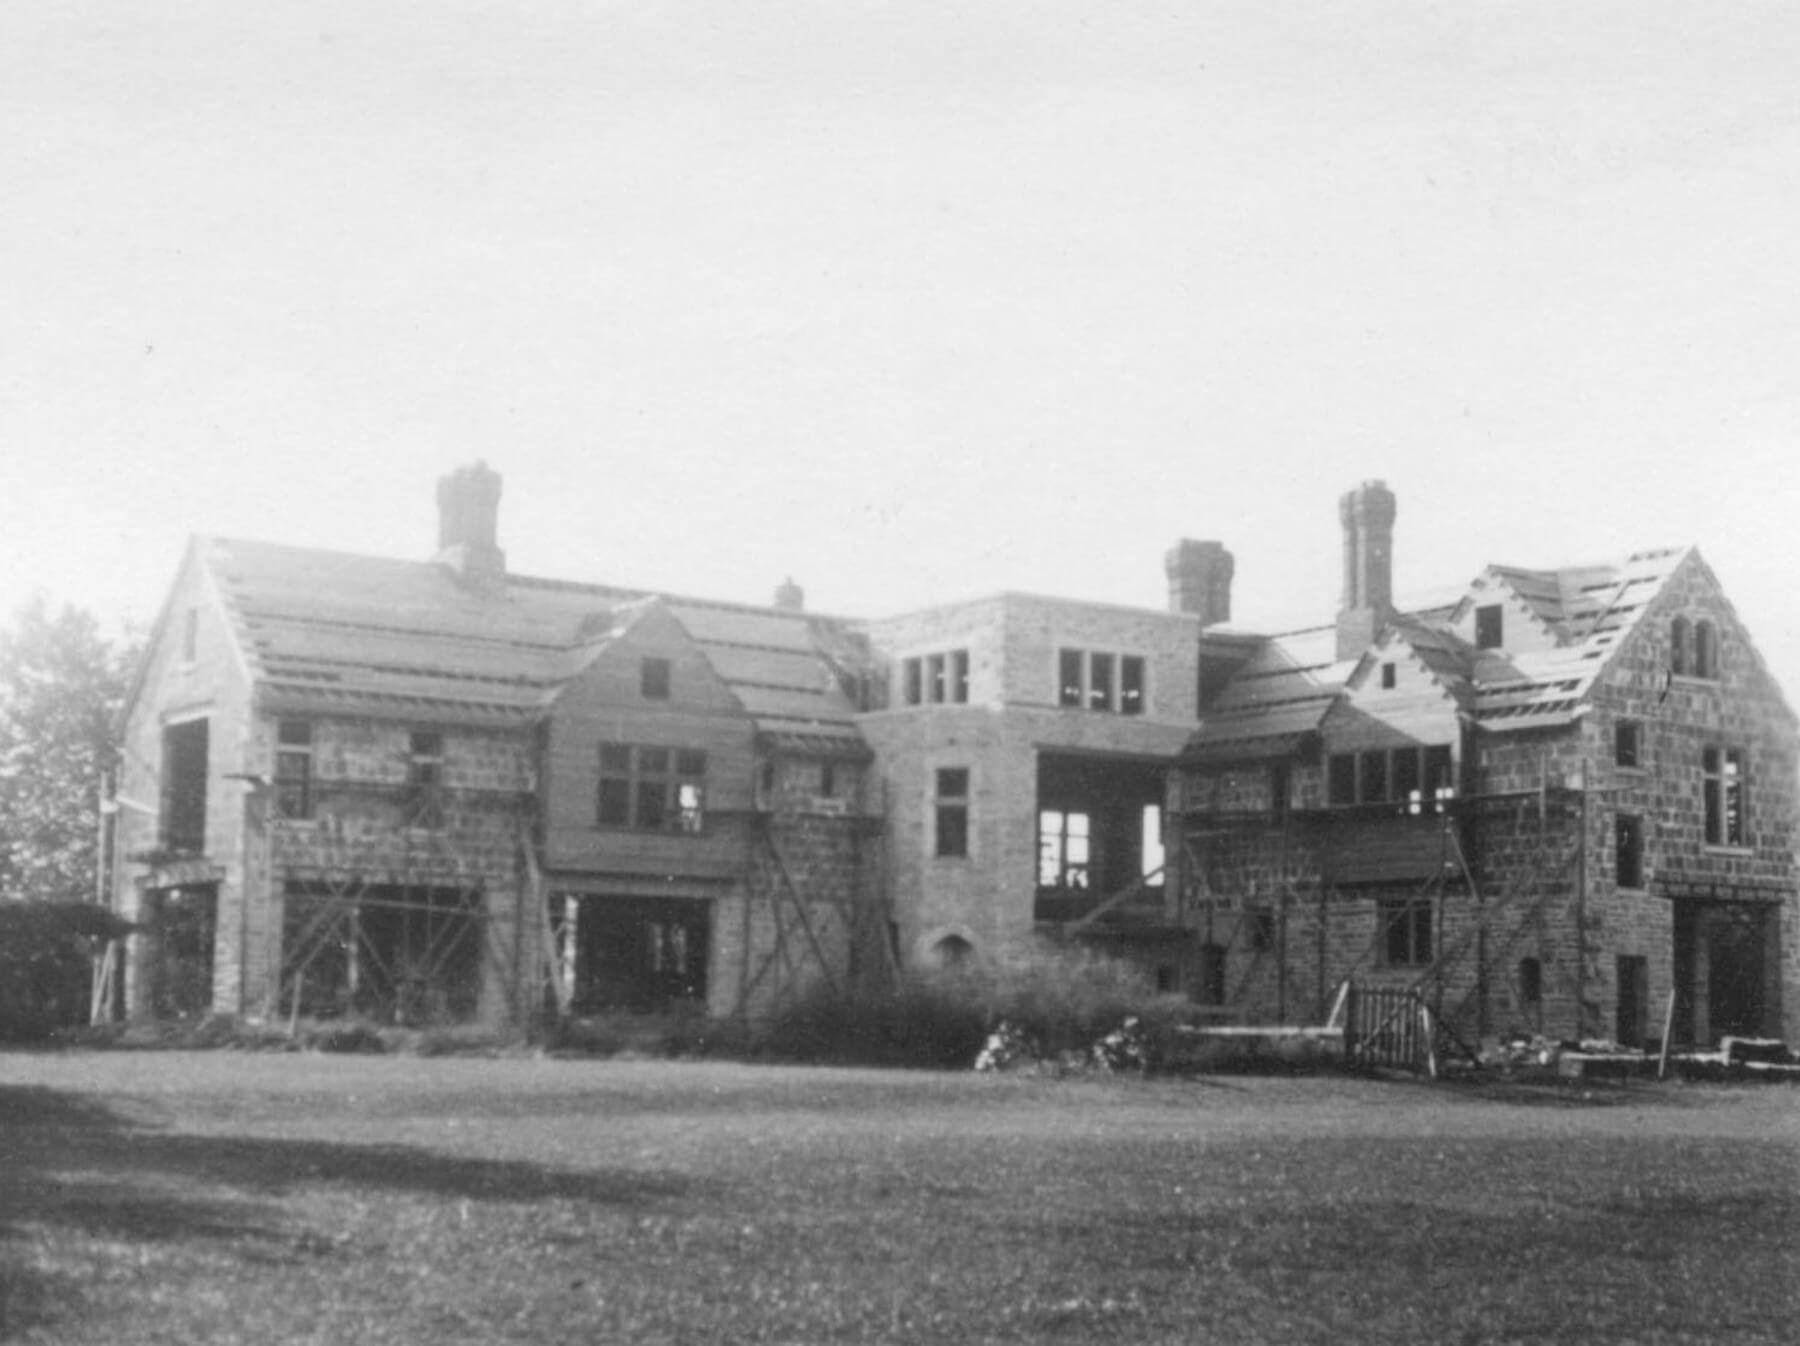  The Ohio Governor’s Residence was built in 1925 by businessman Malcolm D. Jeffrey. It remained a private residence until 1955 when the property was donated by the heirs of Florence Jeffrey Carlile to the State of Ohio to serve as an executive reside